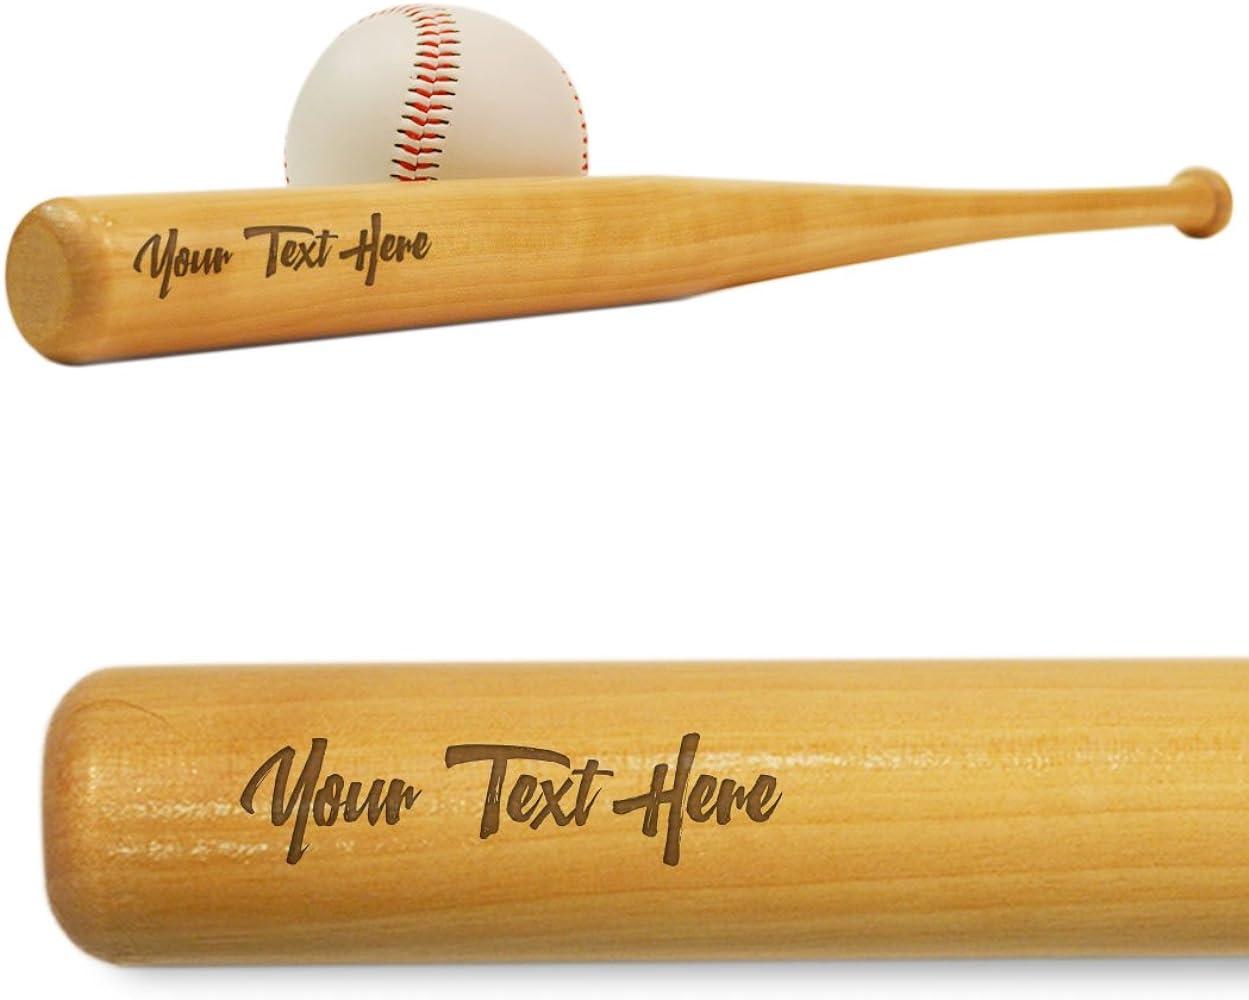 Swing for the fences with an engraved baseball bat, tailored to your style